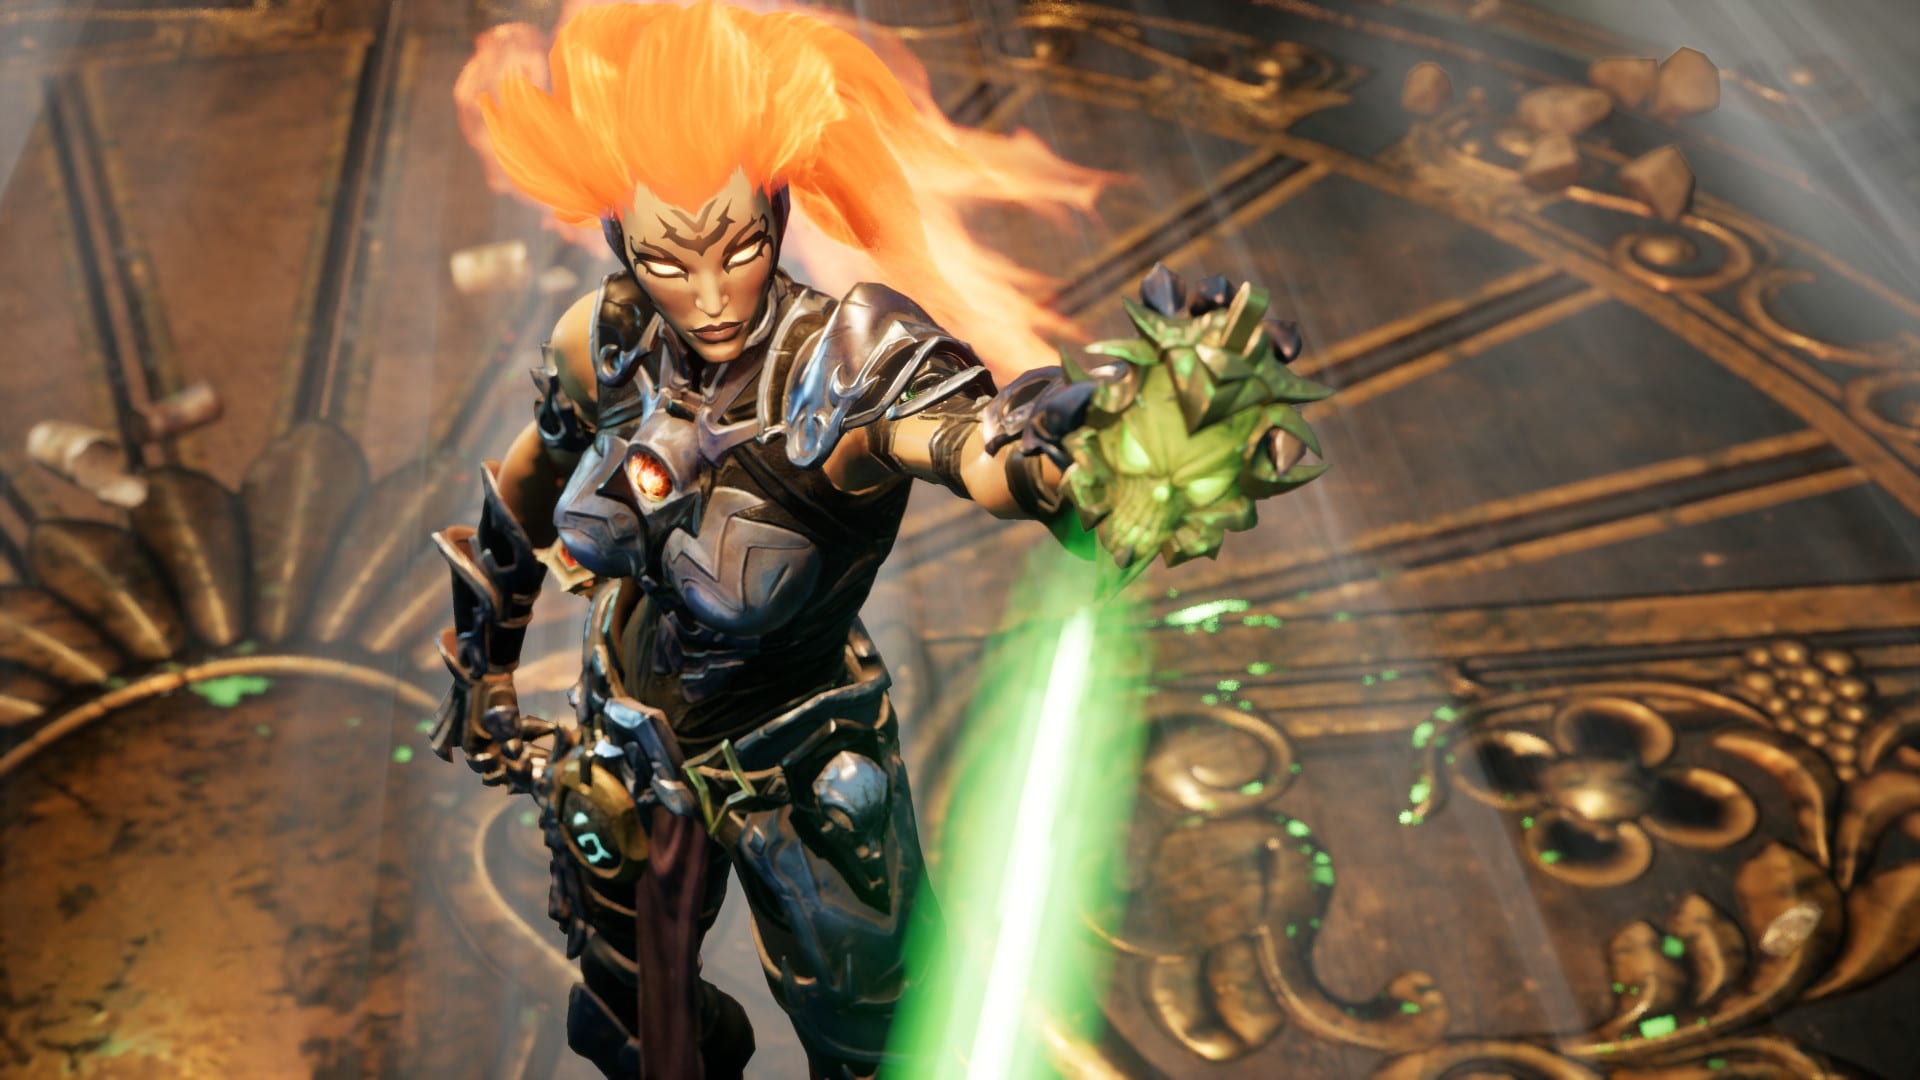 Darksiders 3 Review: You Can Kill Demons With a Whip, What More Do You Want